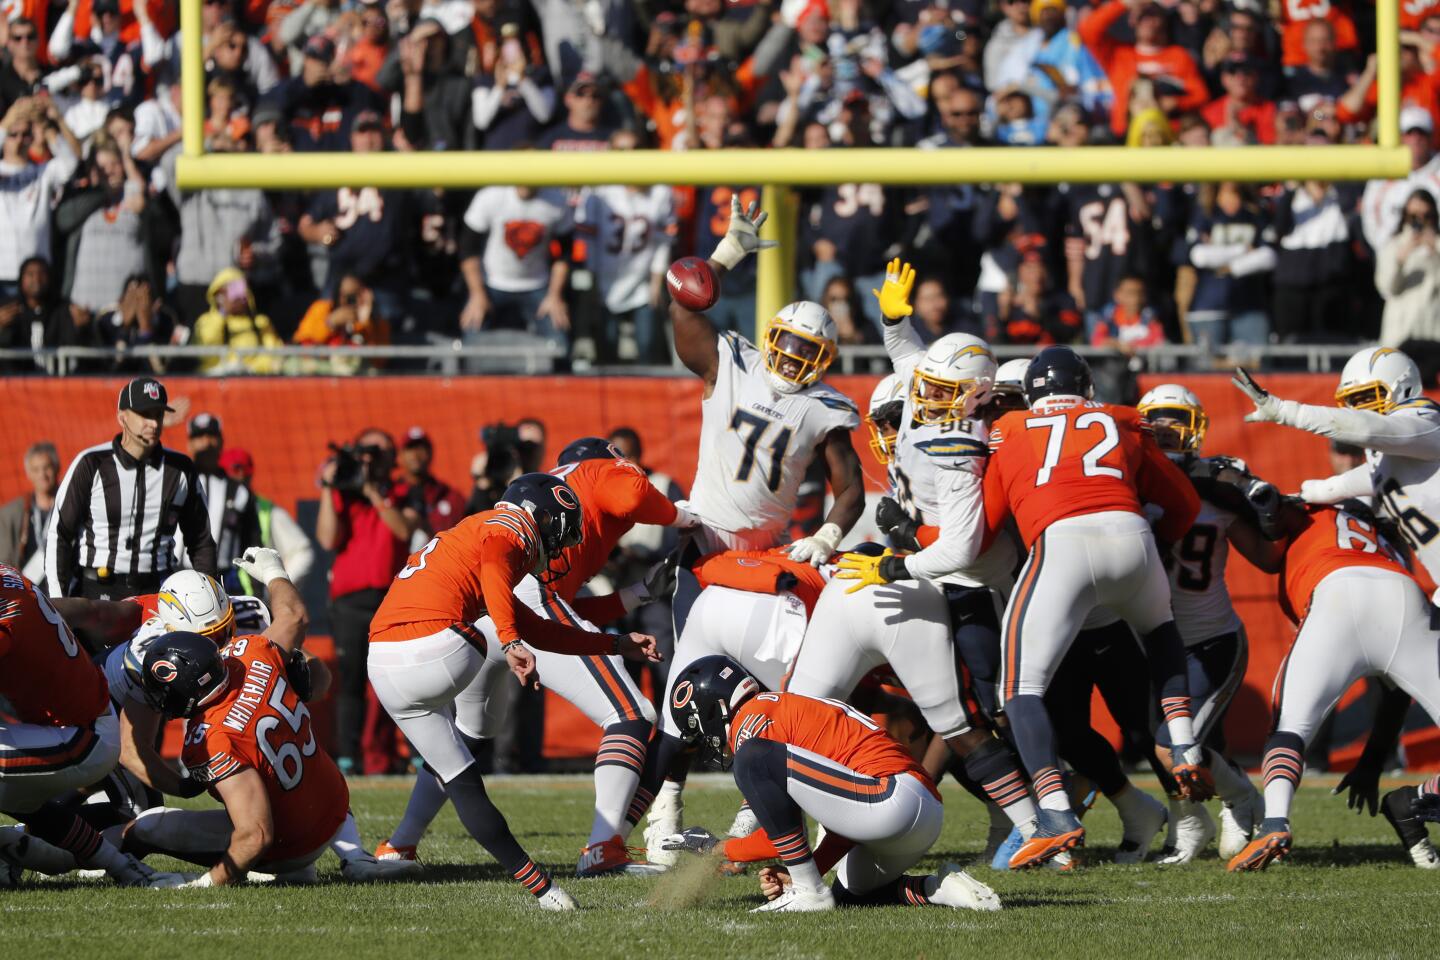 Chicago Bears kicker Eddy Pineiro, left, attempts a field goal on the final play of an NFL football game against the Los Angeles Chargers, Sunday, Oct. 27, 2019, in Chicago. Pineiro missed the field goal as the Chargers won 17-16. (AP Photo/Charles Rex Arbogast)